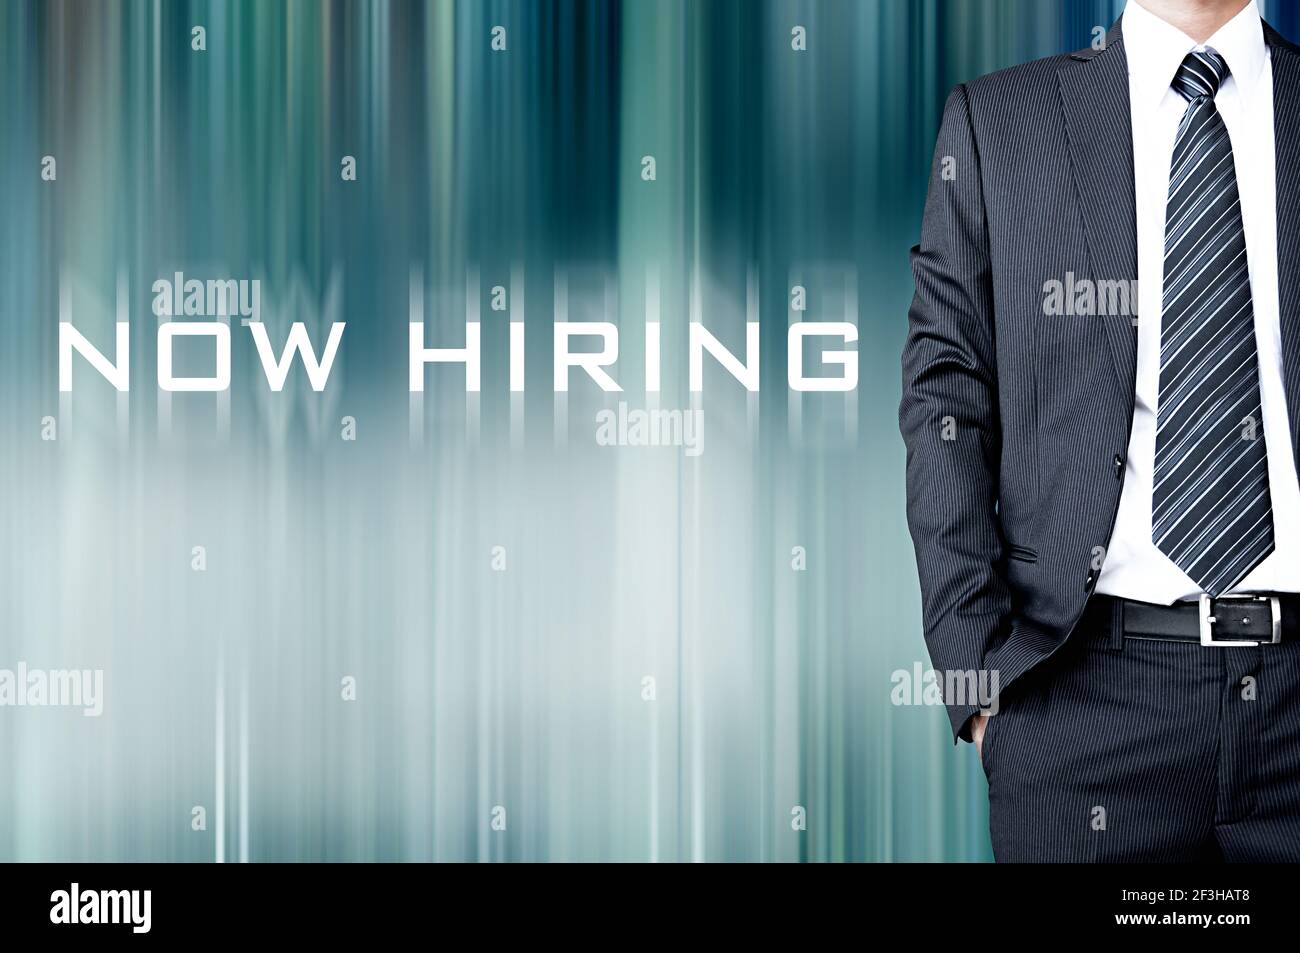 NOW HIRING sign on motion blur abstract background with standing businessman Stock Photo